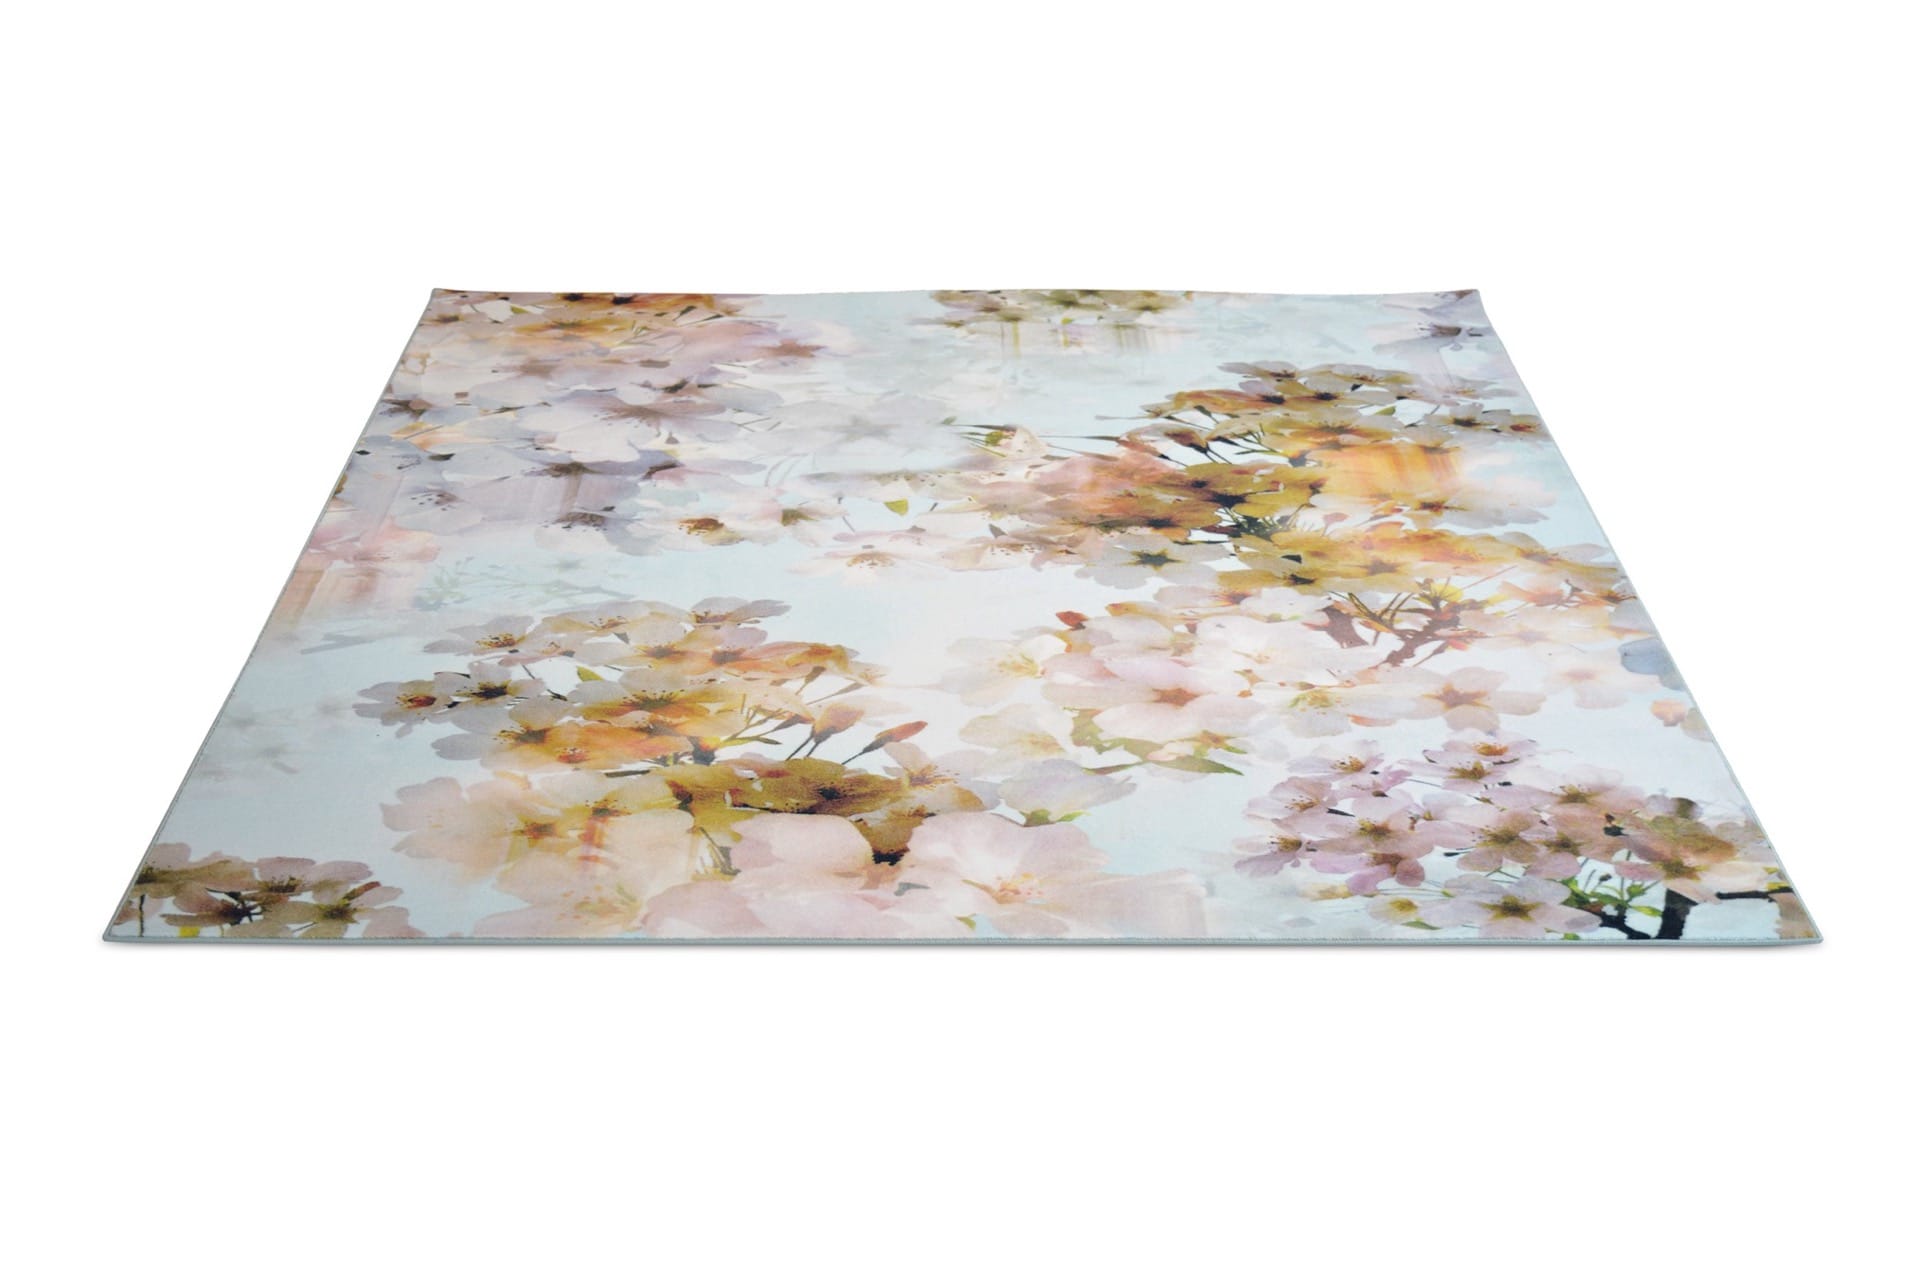 Vanilla Pale Blue 53908 rug by Ted Baker